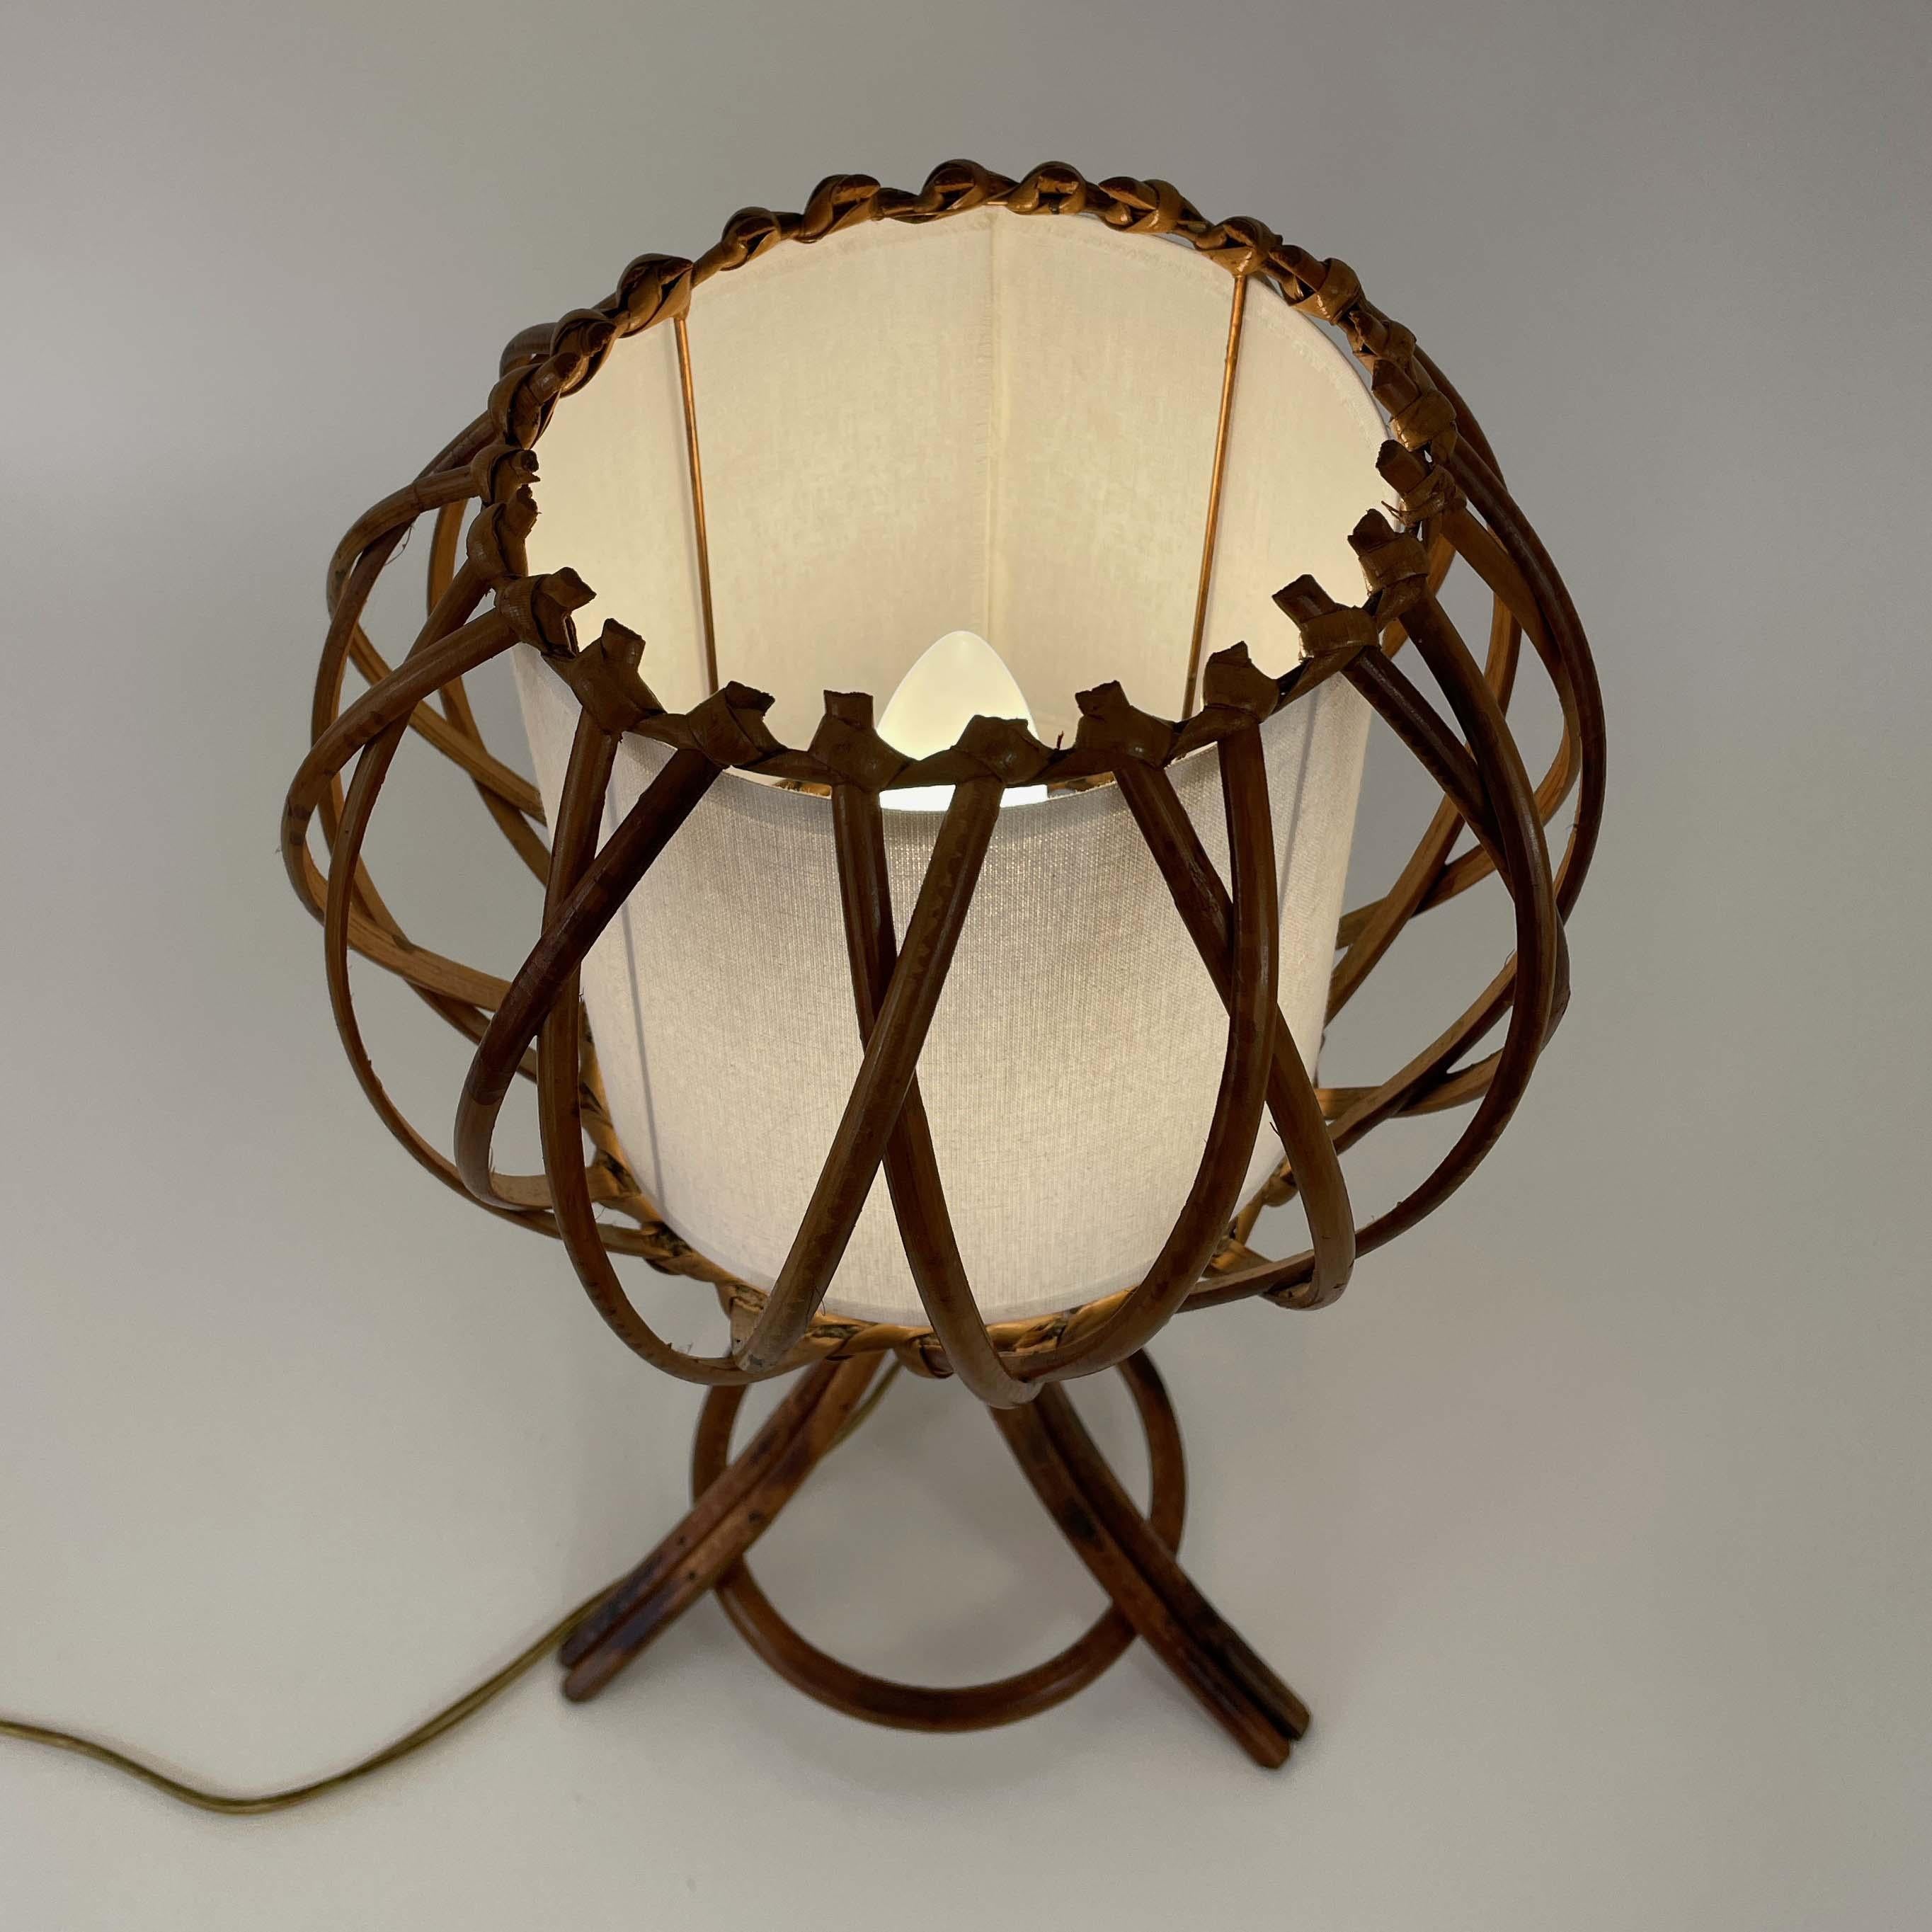 Rattan Bamboo & Fabric Table Lamp, Louis SOGNOT France 1950s For Sale 9